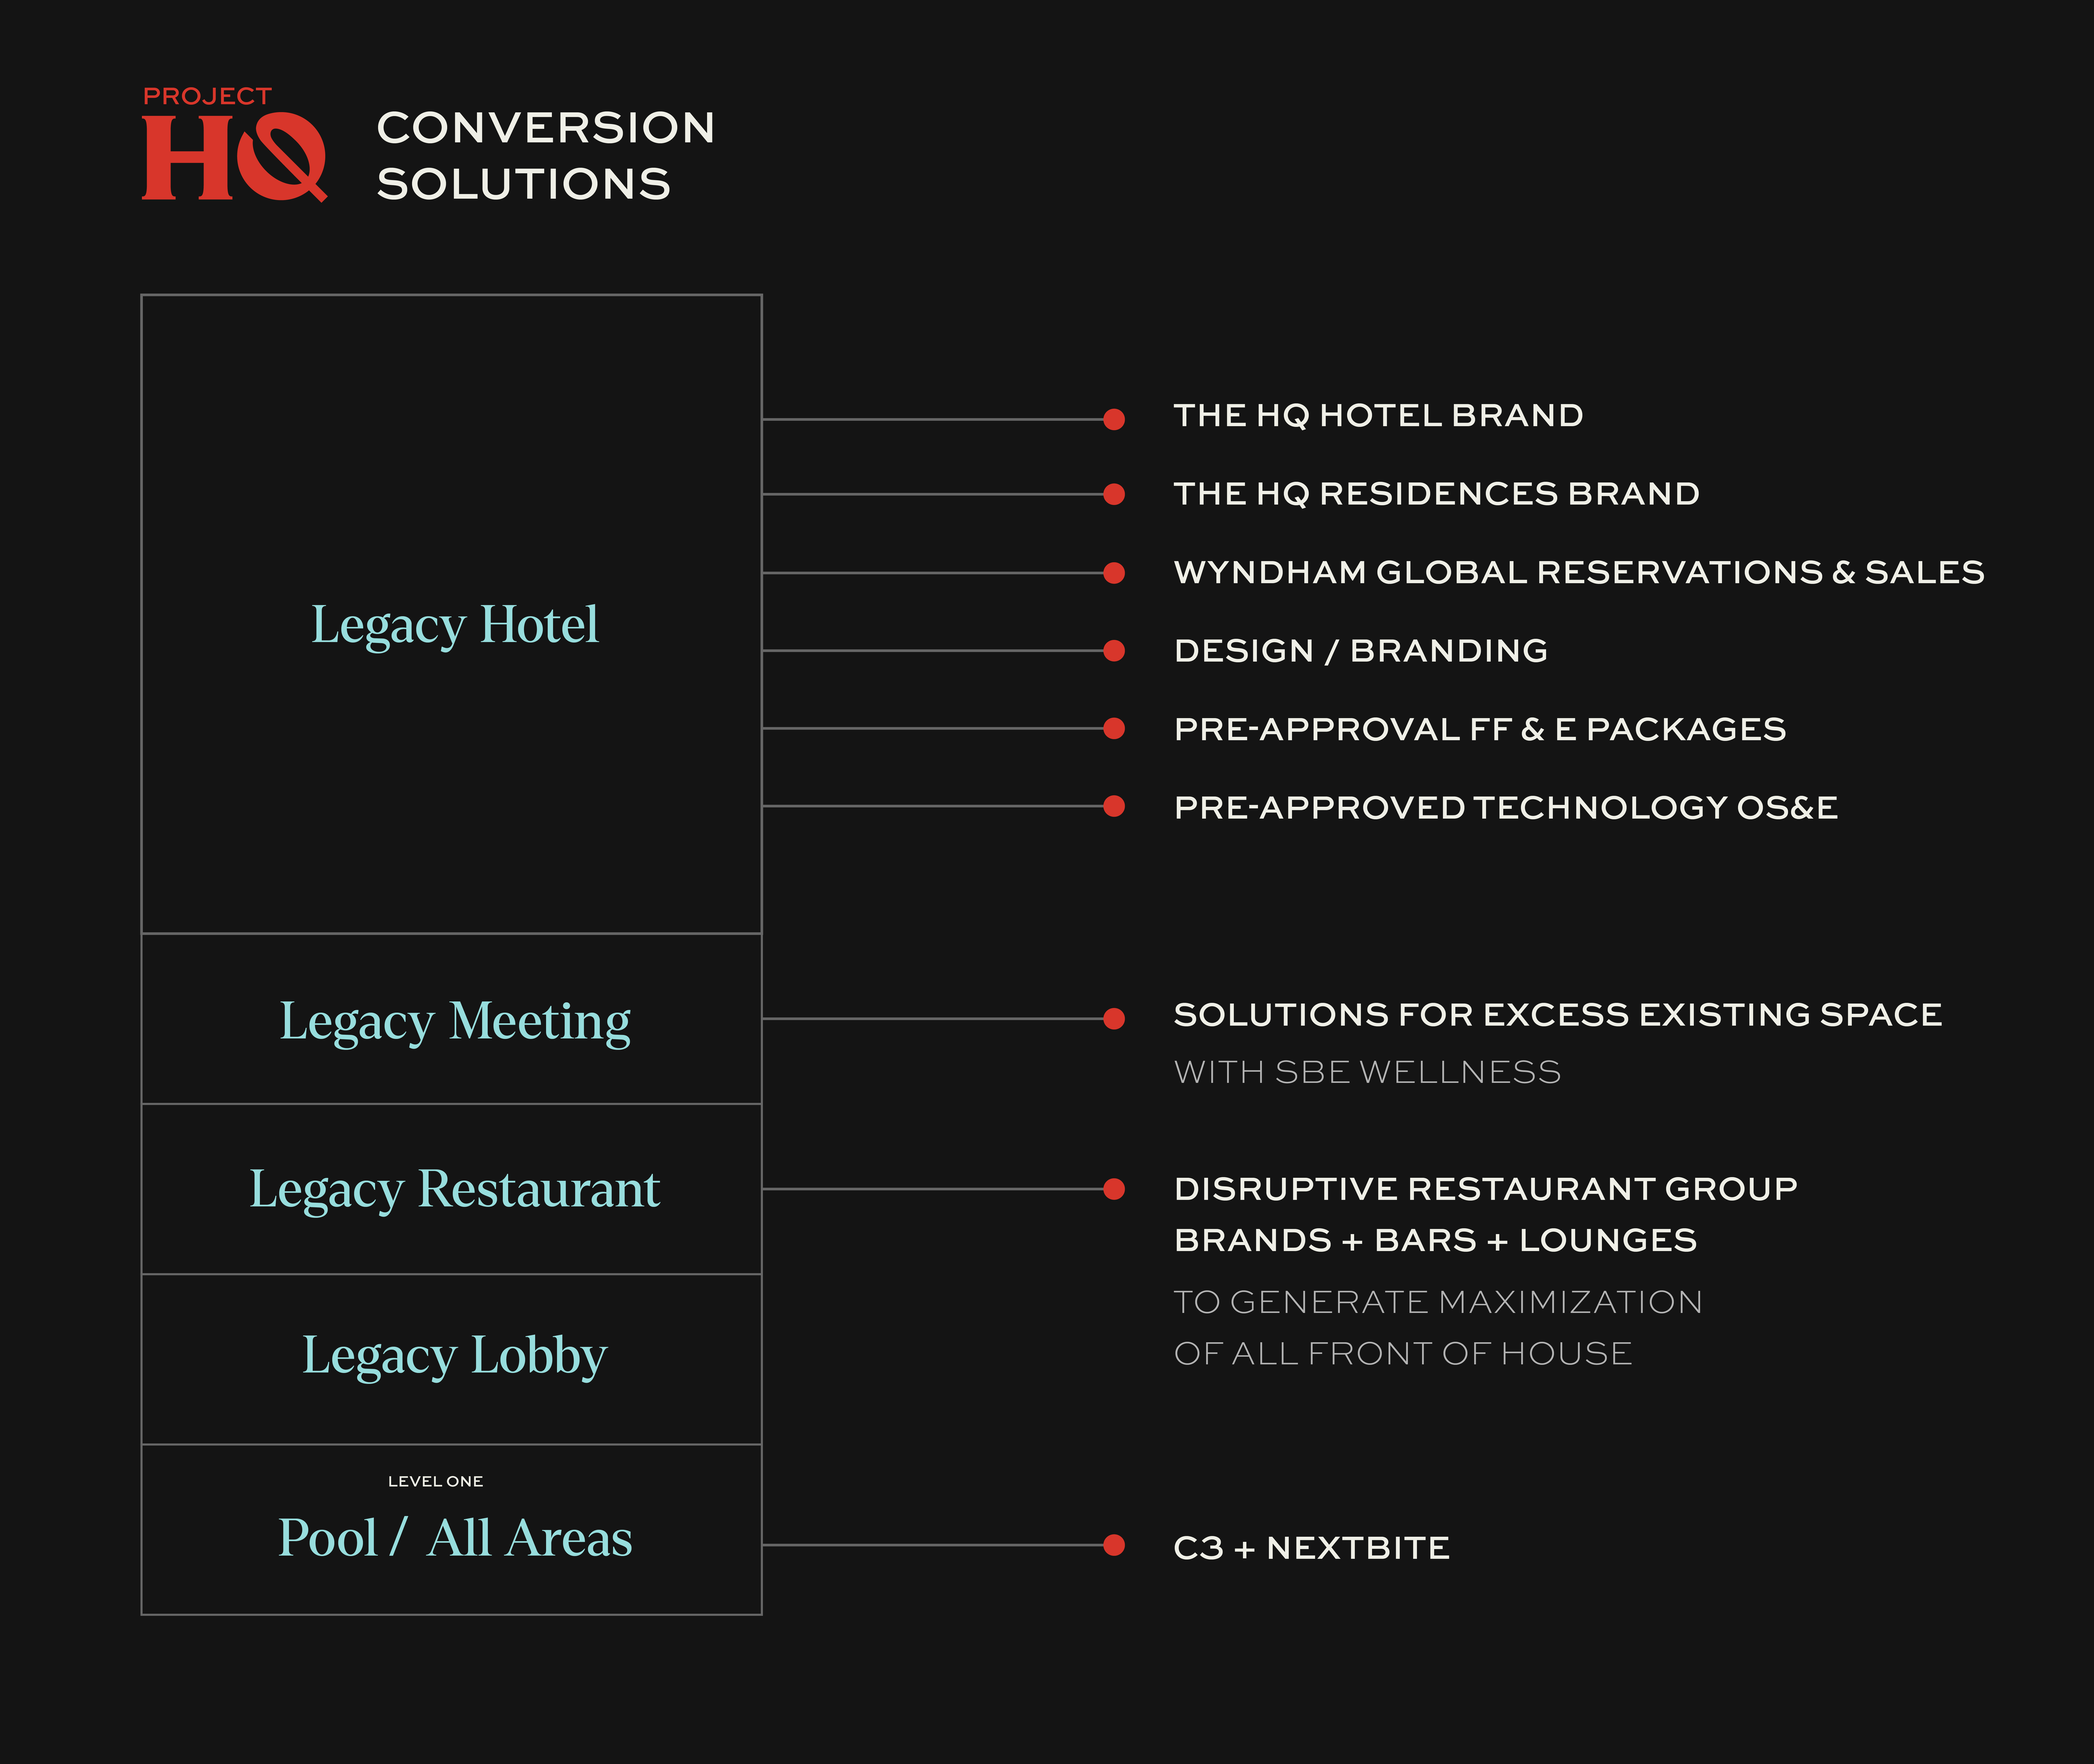 Project HQ Conversion Offerings